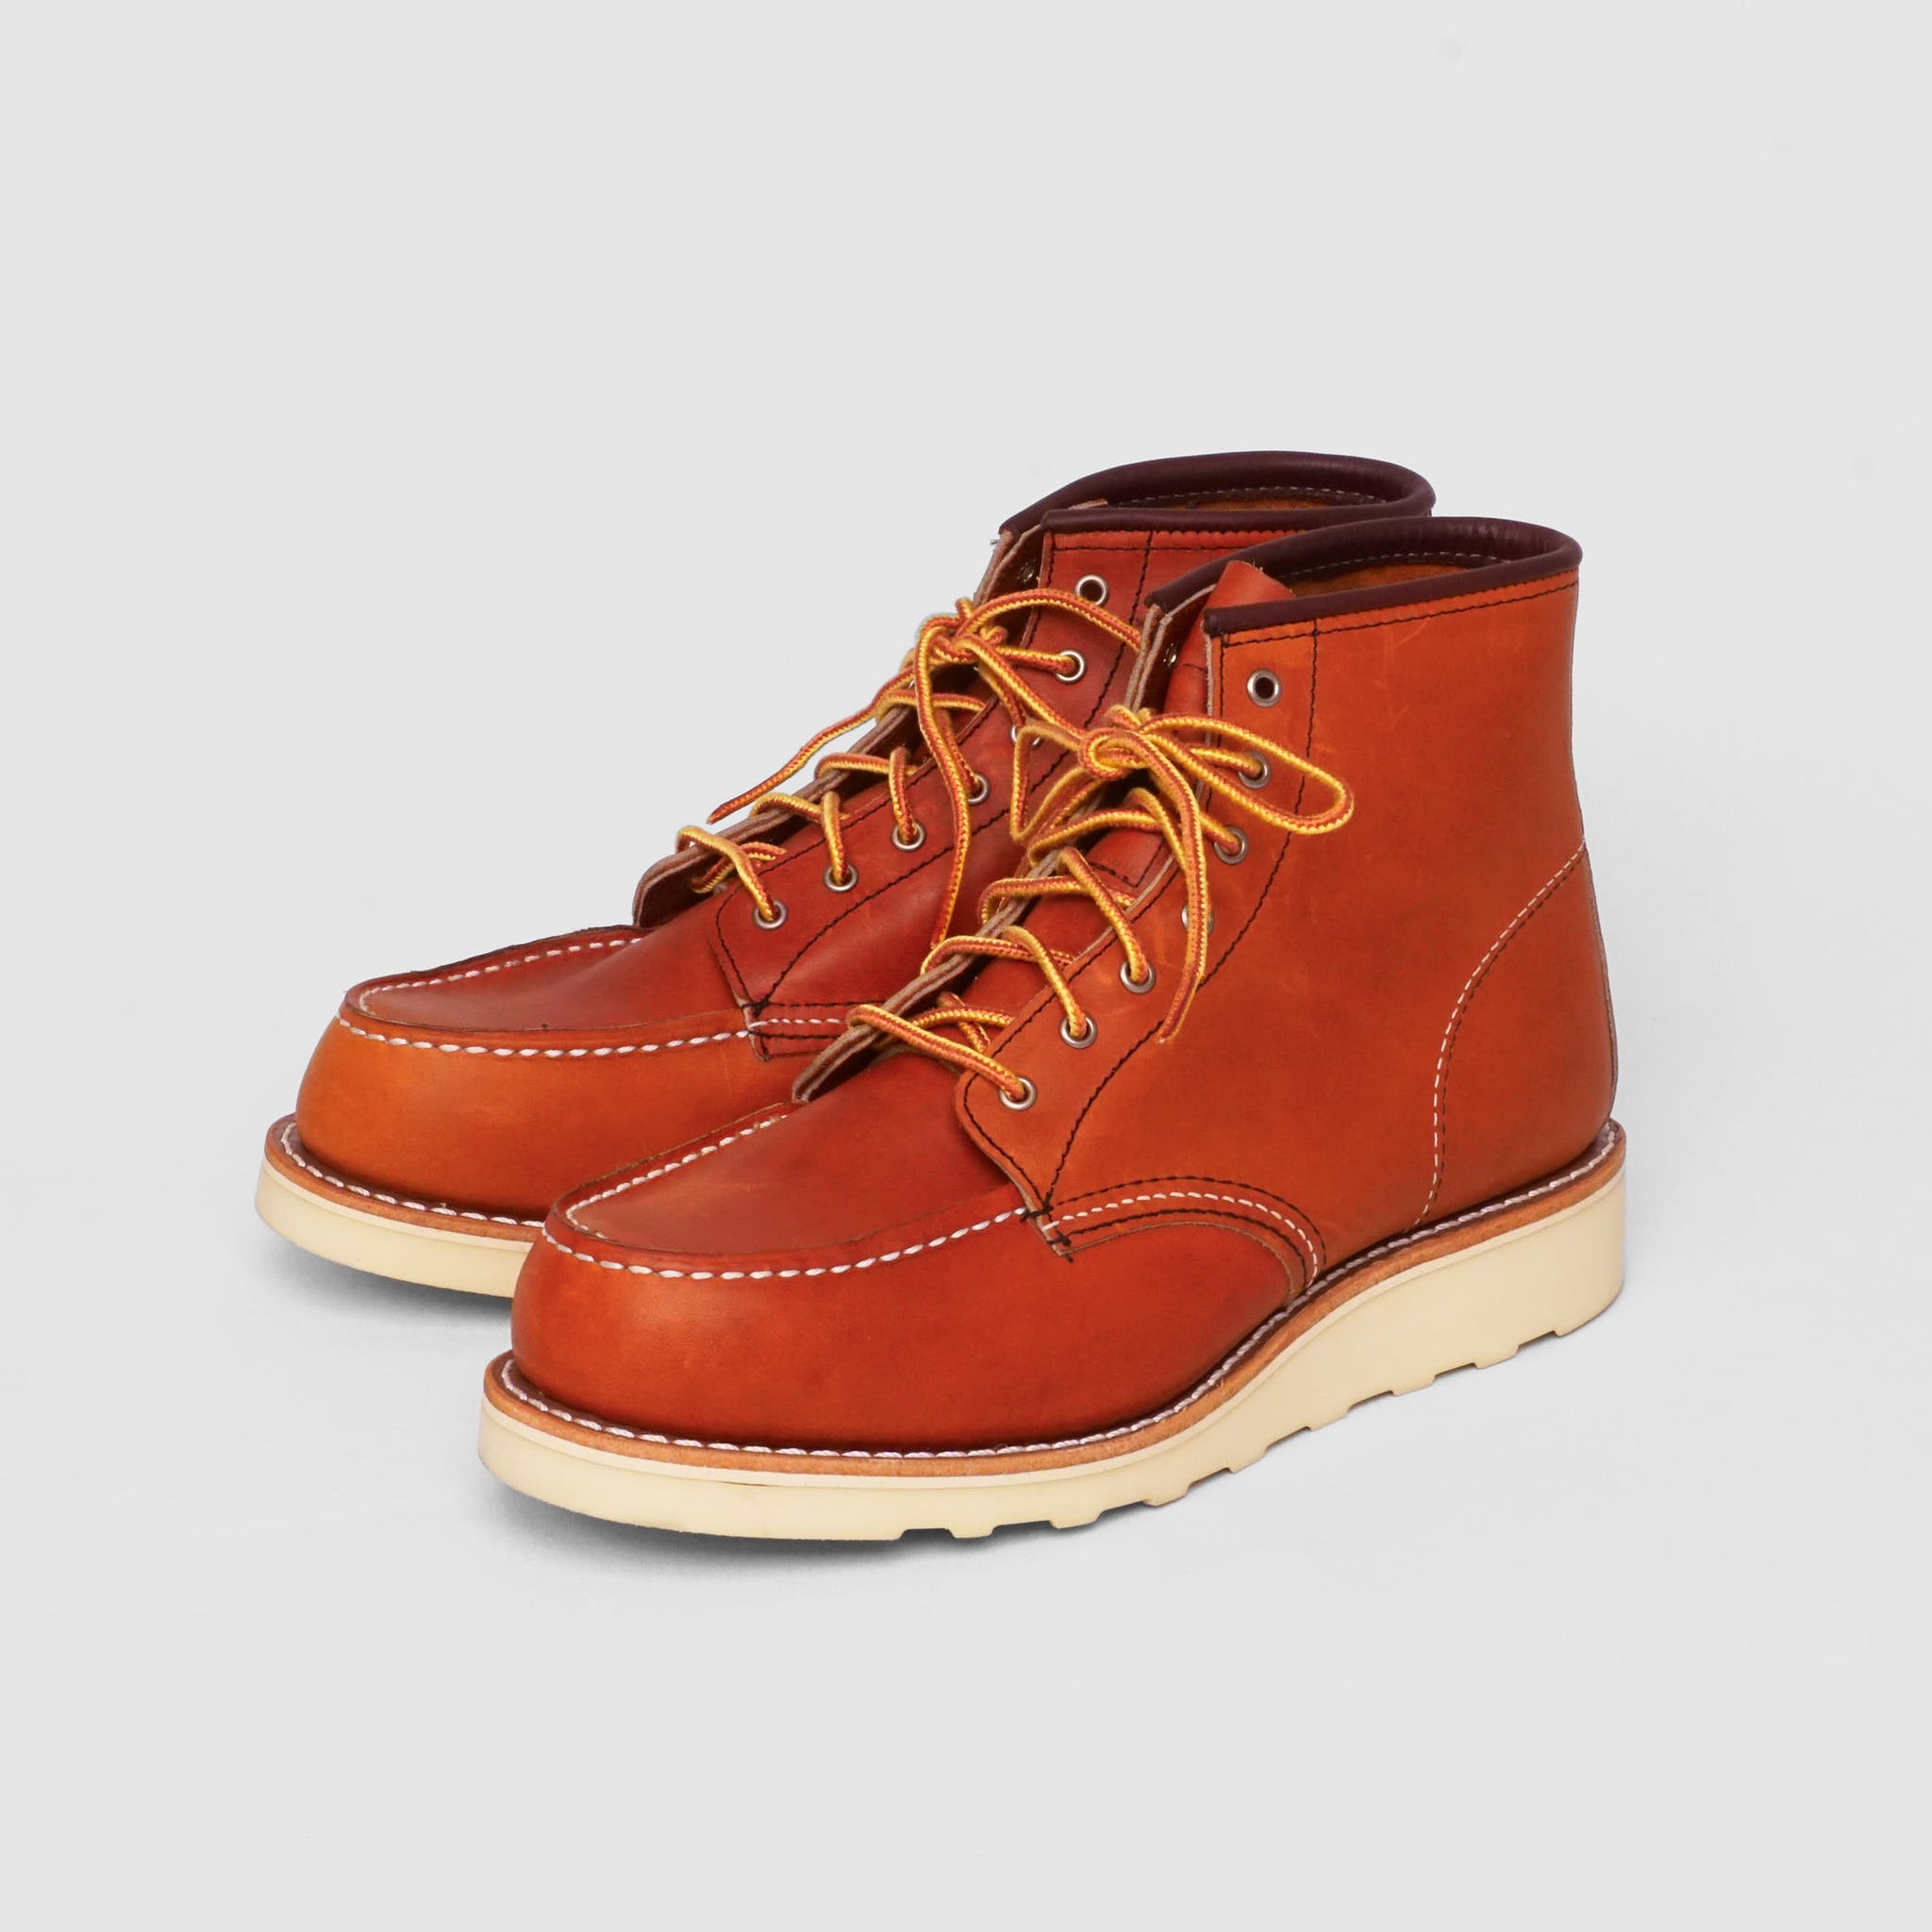 Red Wing Heritage Shoes Ladies Classic Moc-Toe, 3375, 3373, 3428 ...